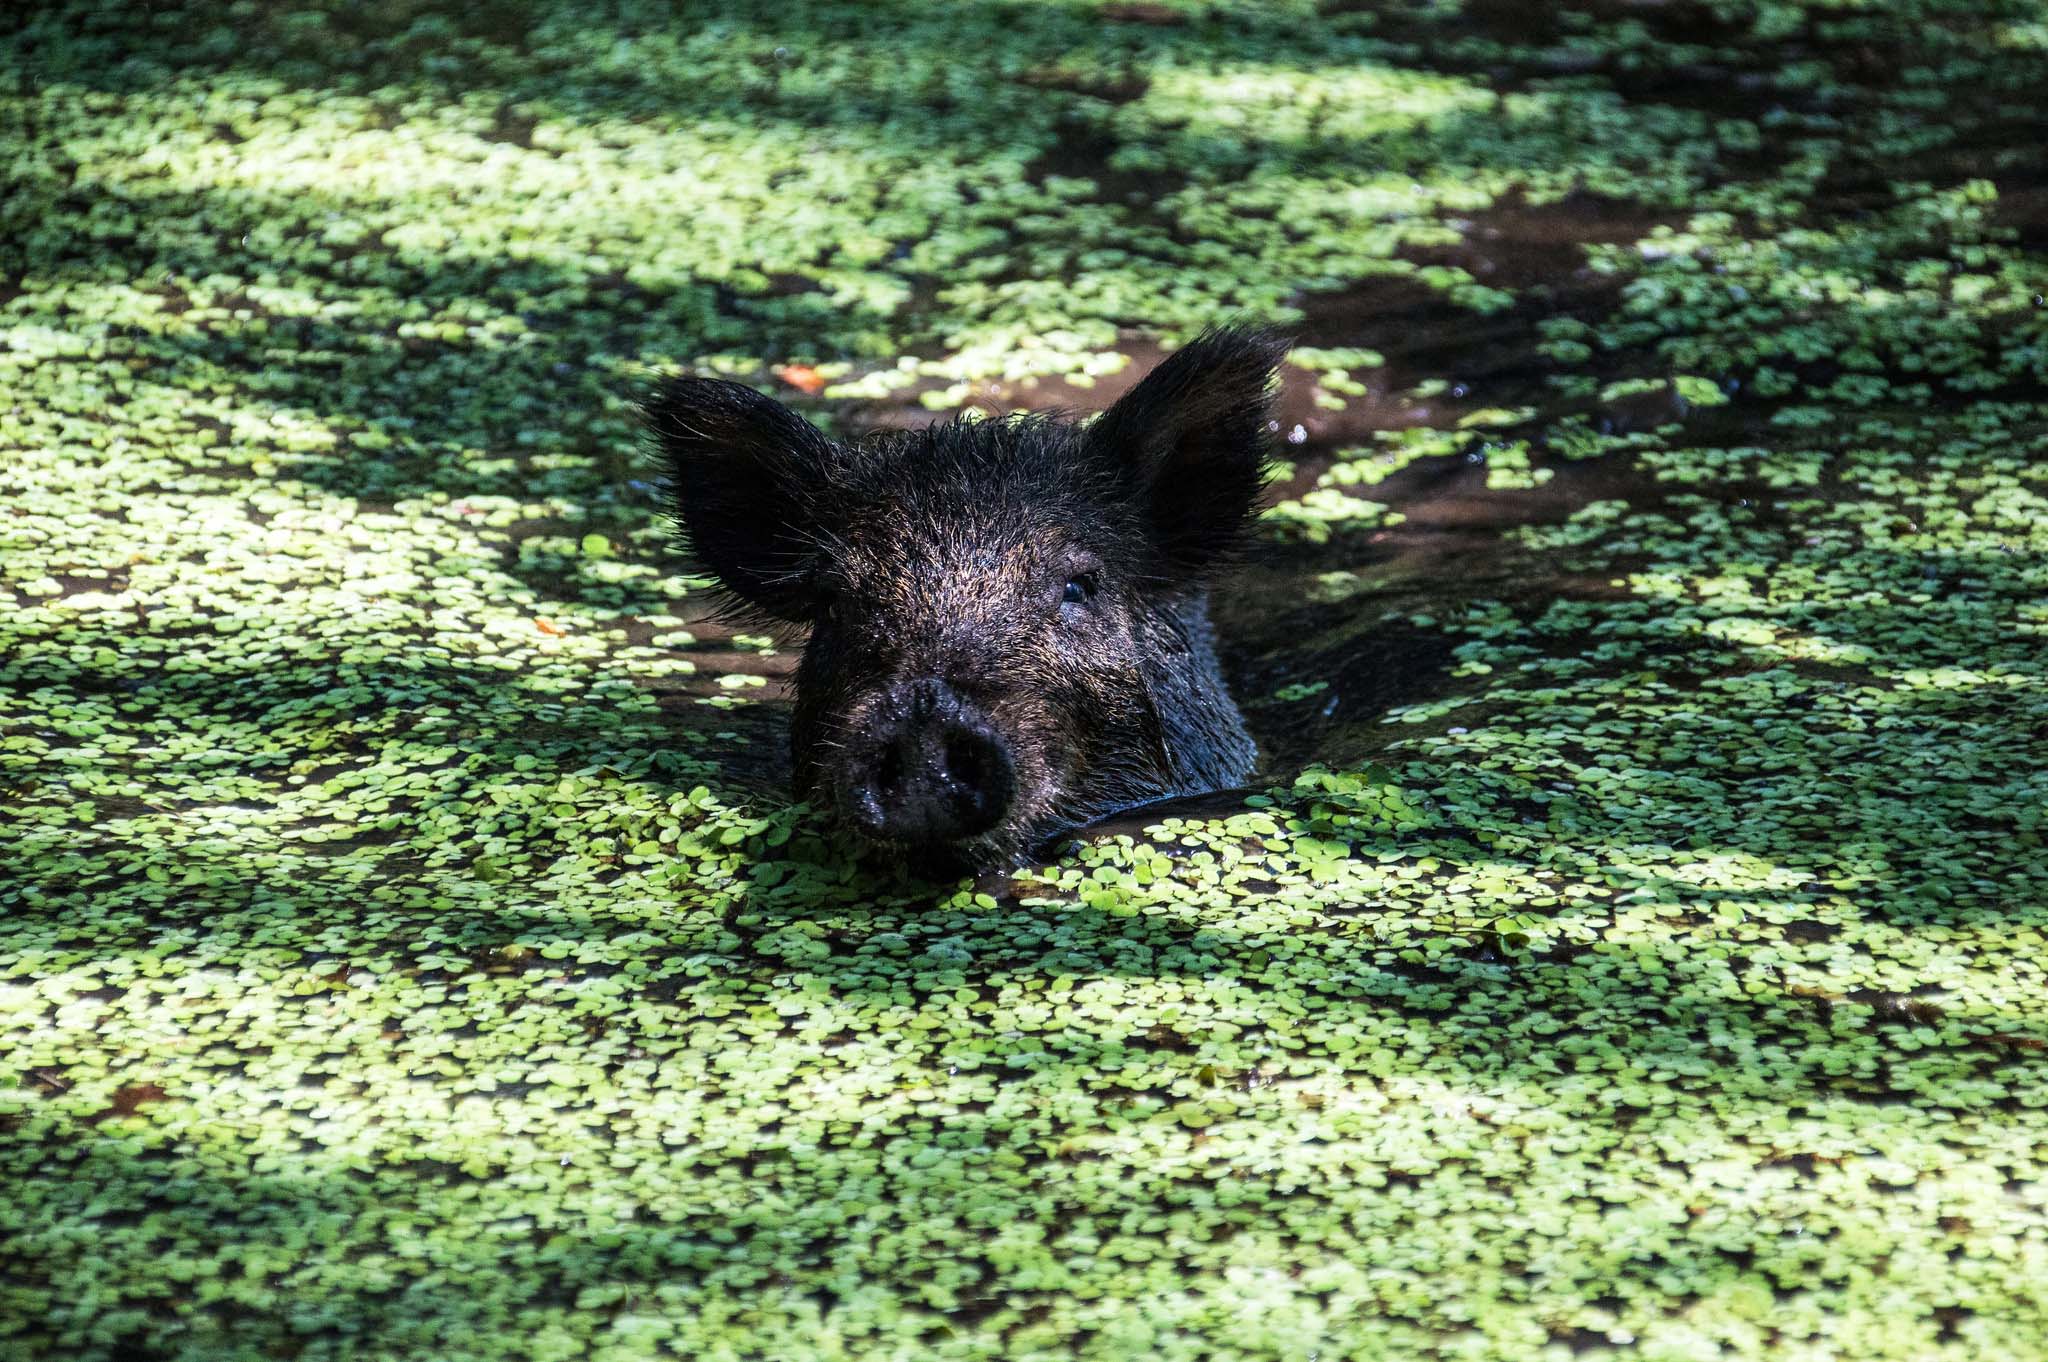 A dark-coloured wild boar swimming toward the camera through water covered in green plant debris